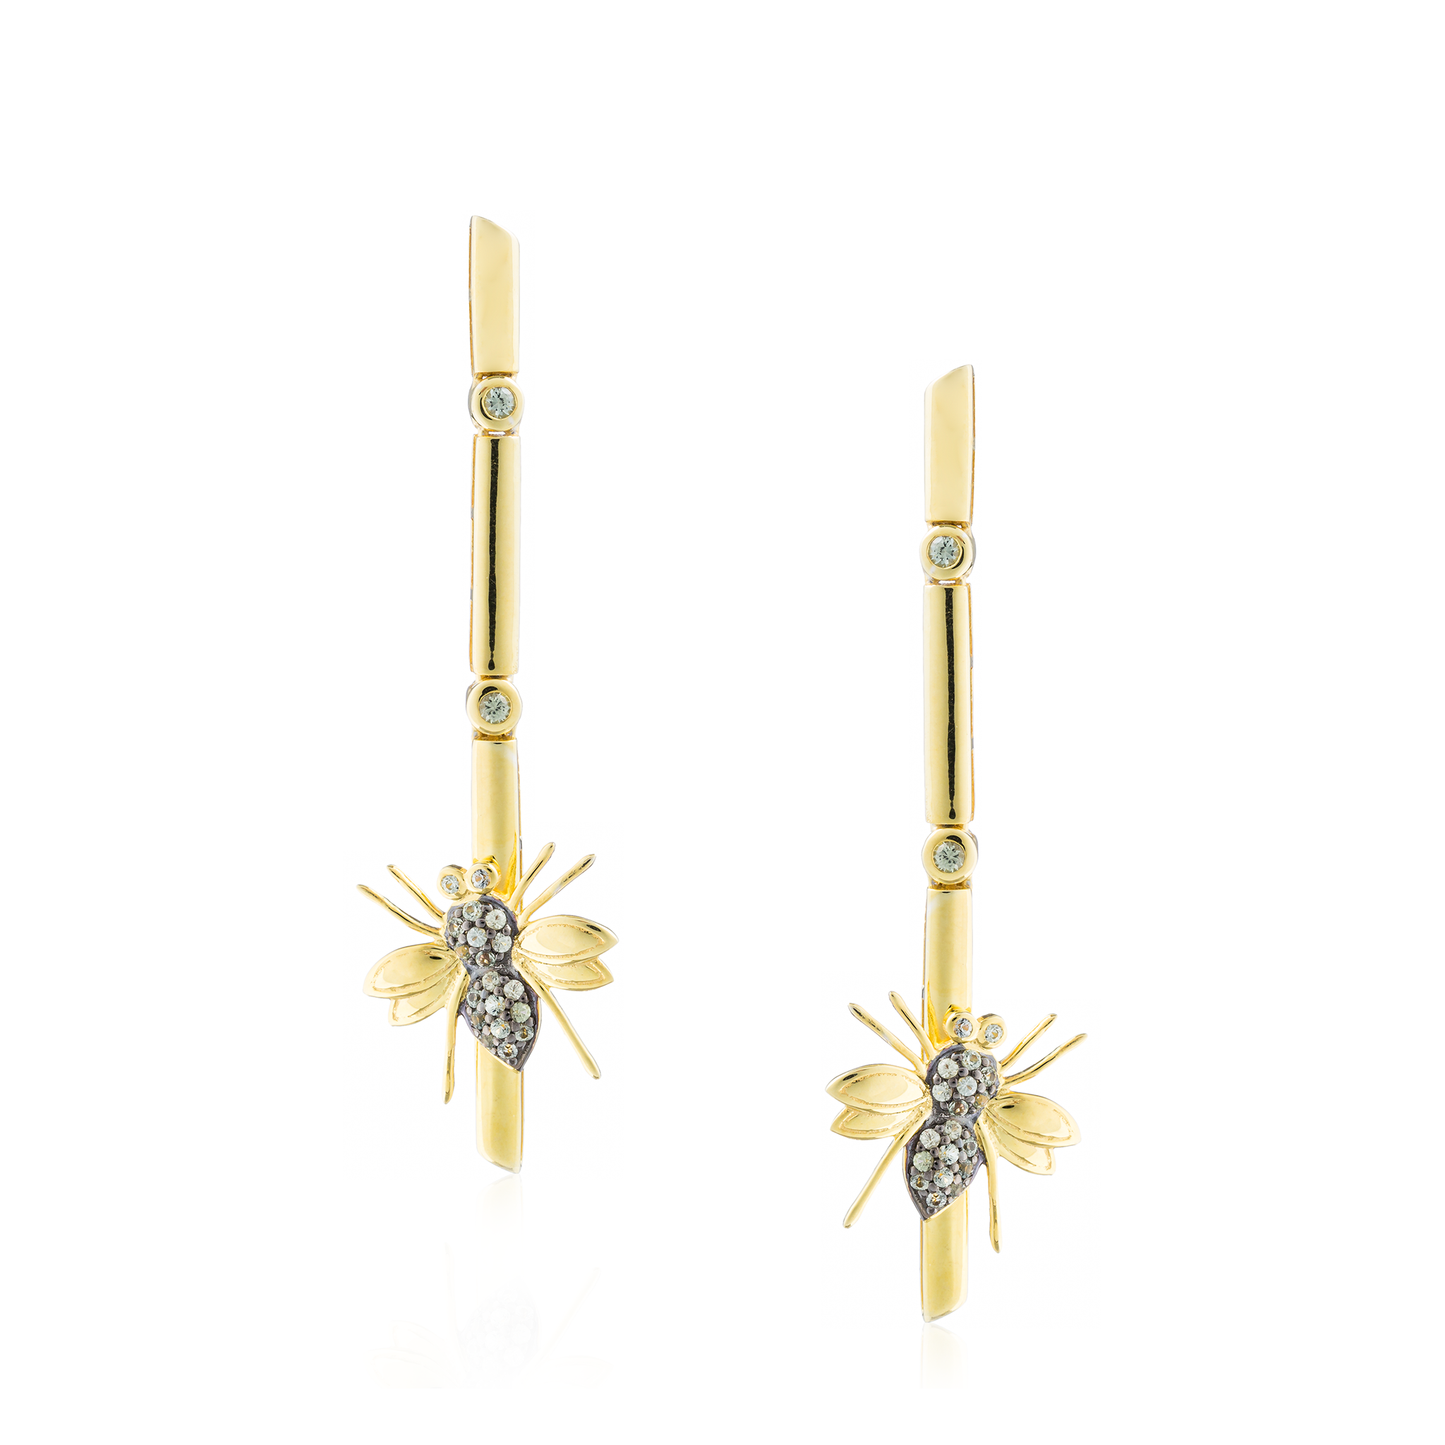 925 Silver Earrings Plated in Yellow Gold with Green Sapphires